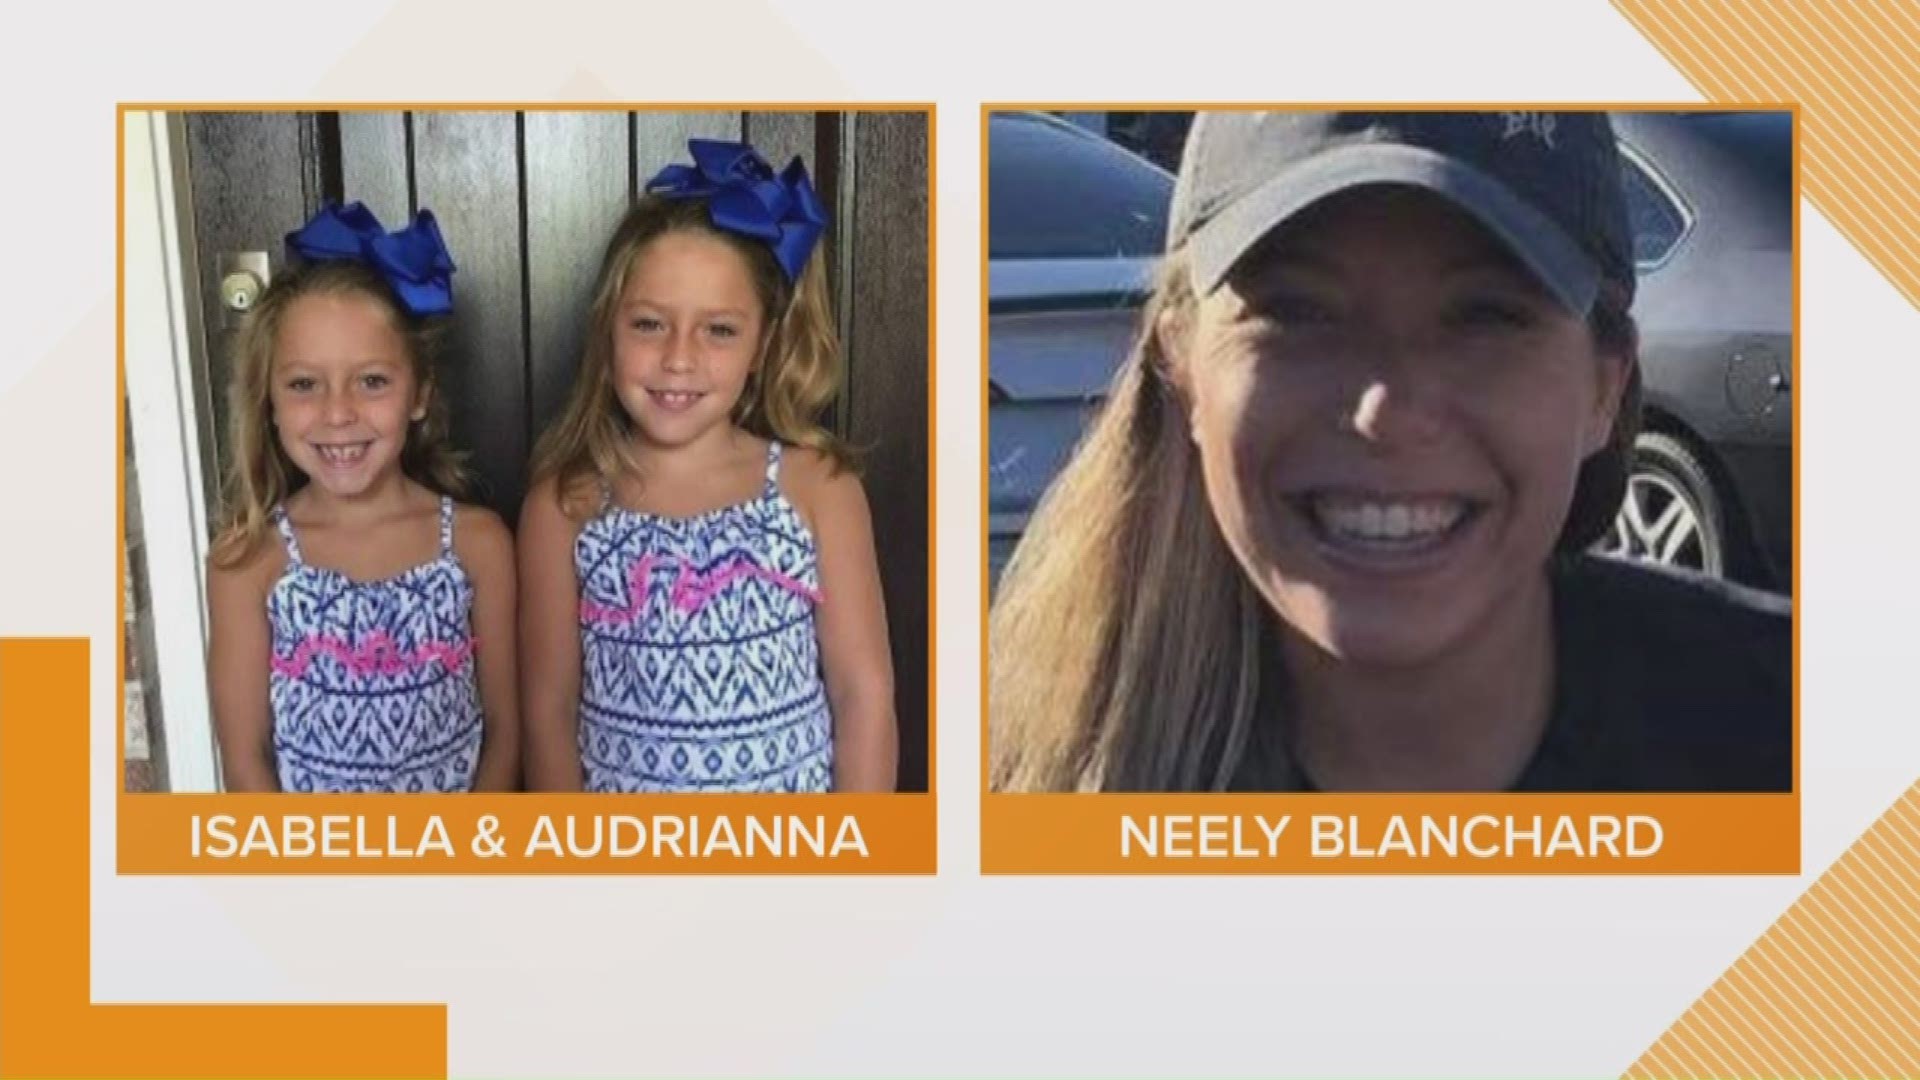 The Amber Alert for Isabella and Audriana Blanchard was canceled around 2 a.m. on Thursday.